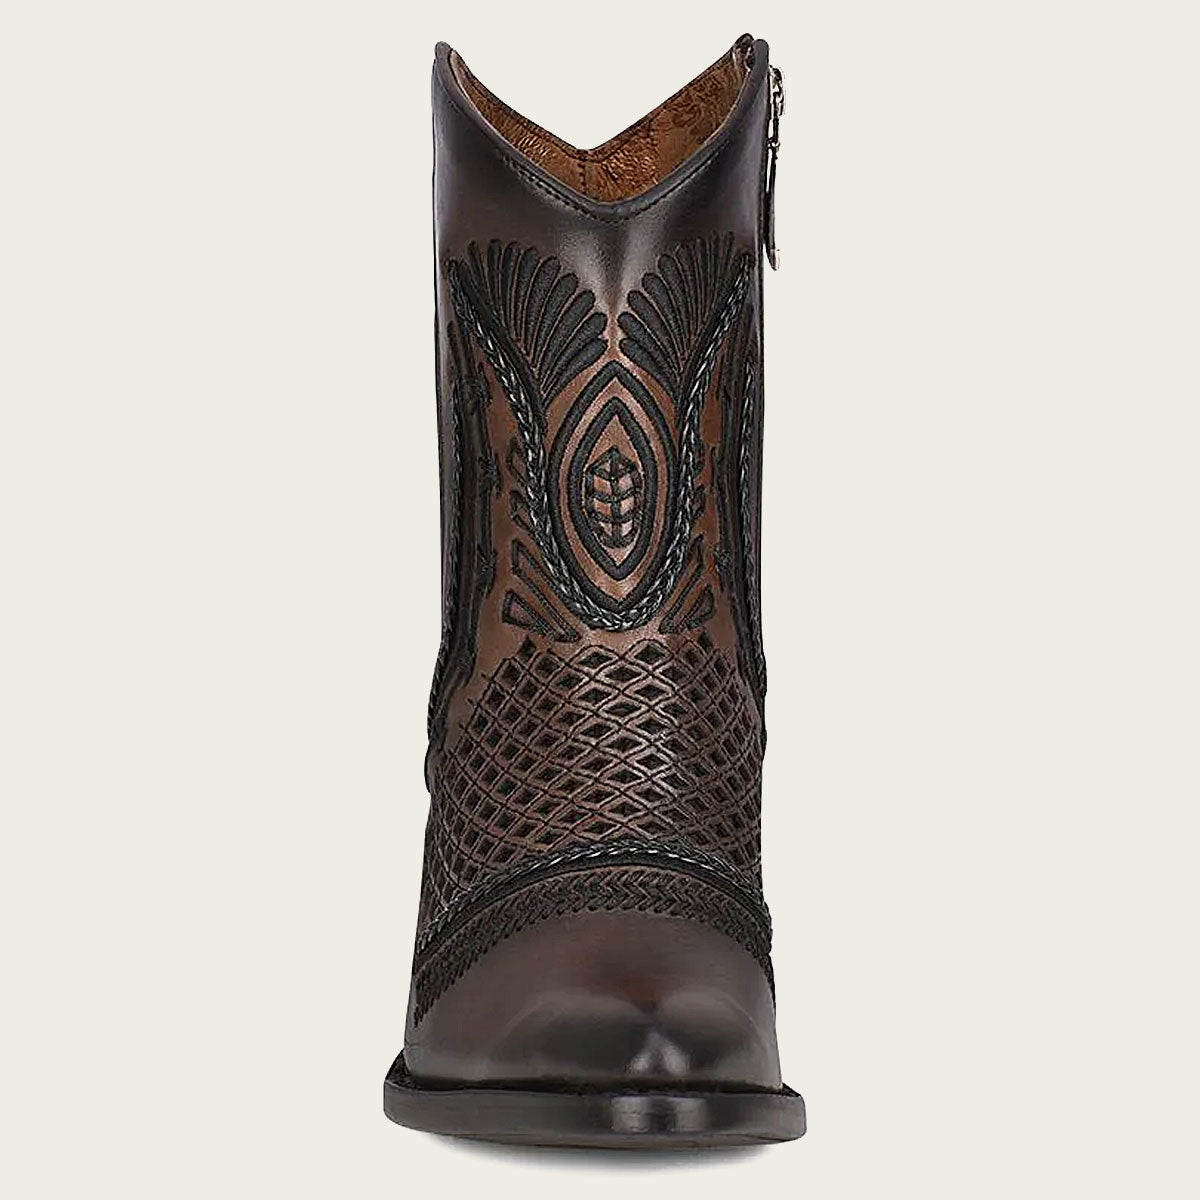 Artisan brown leather booties. Embroidery, and handcrafted fabric on the front and sides create a captivating visual impact